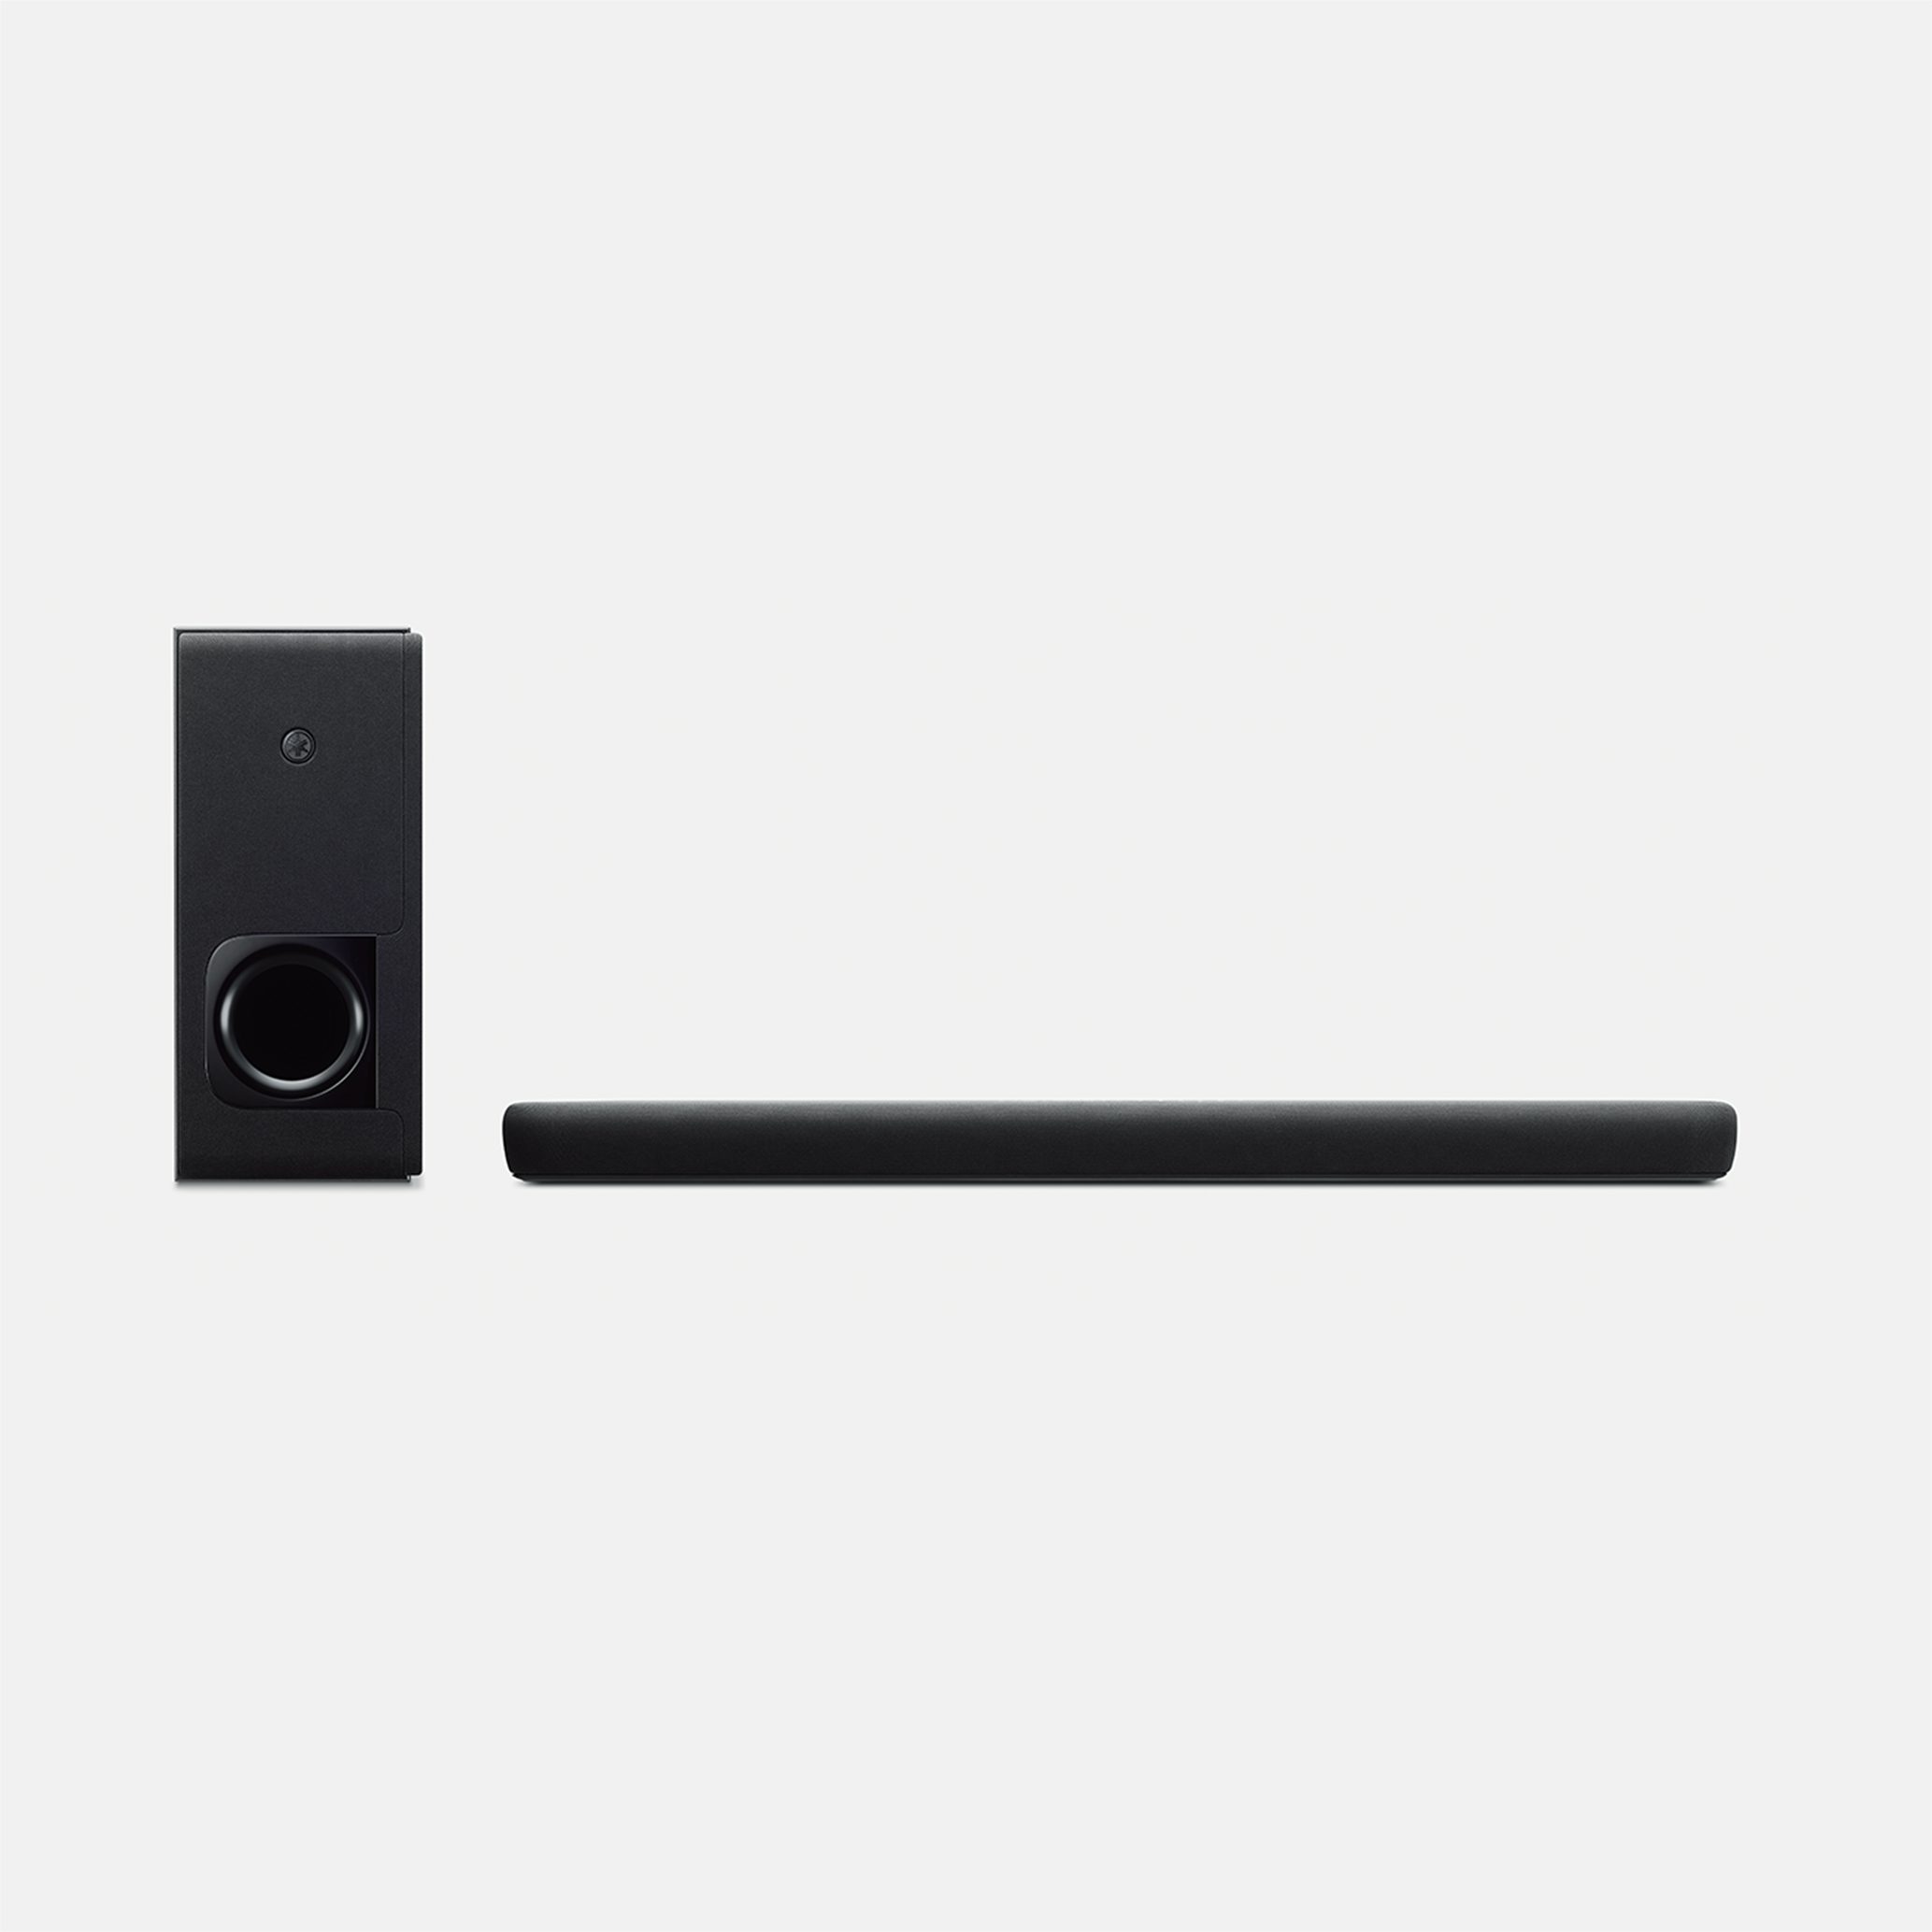 YAS-209 - Overview - Sound Bars - Audio & Visual - Products